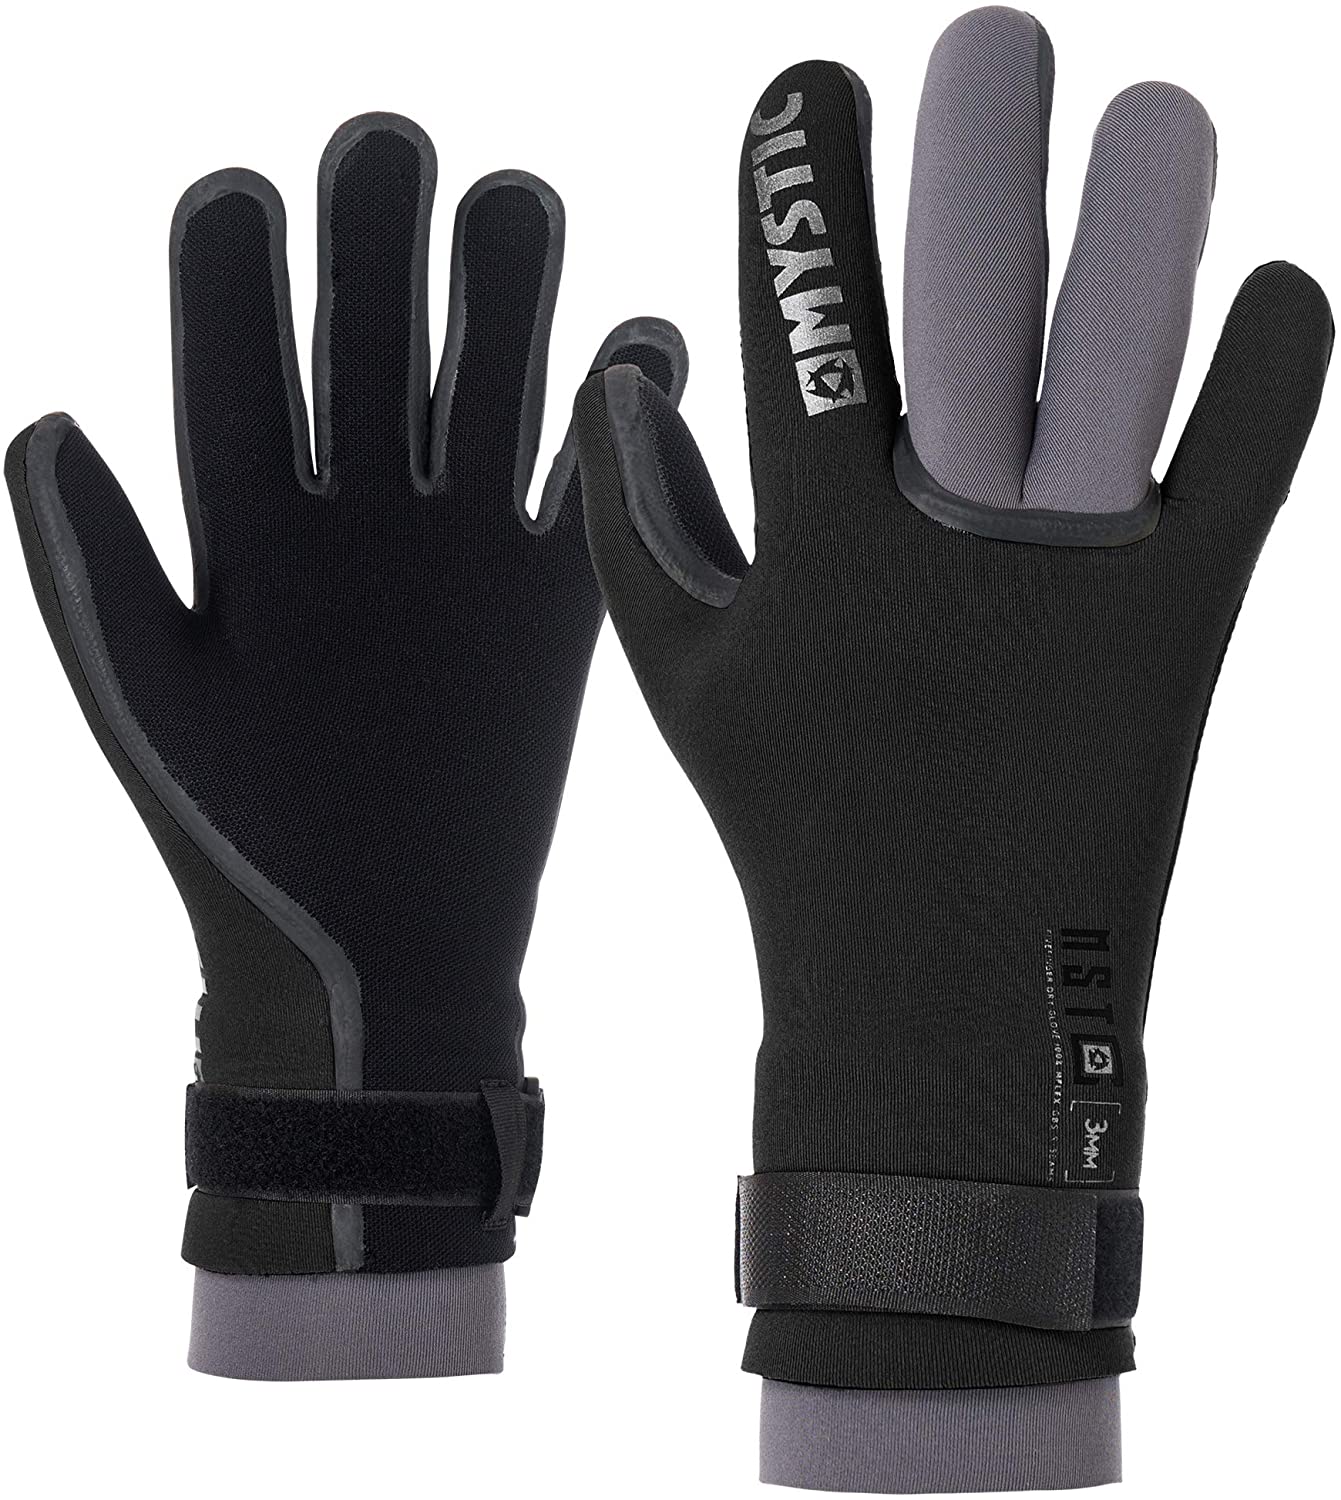 MYSTIC MSTC DRY GLOVES - 3MM DOUBLE CUFF